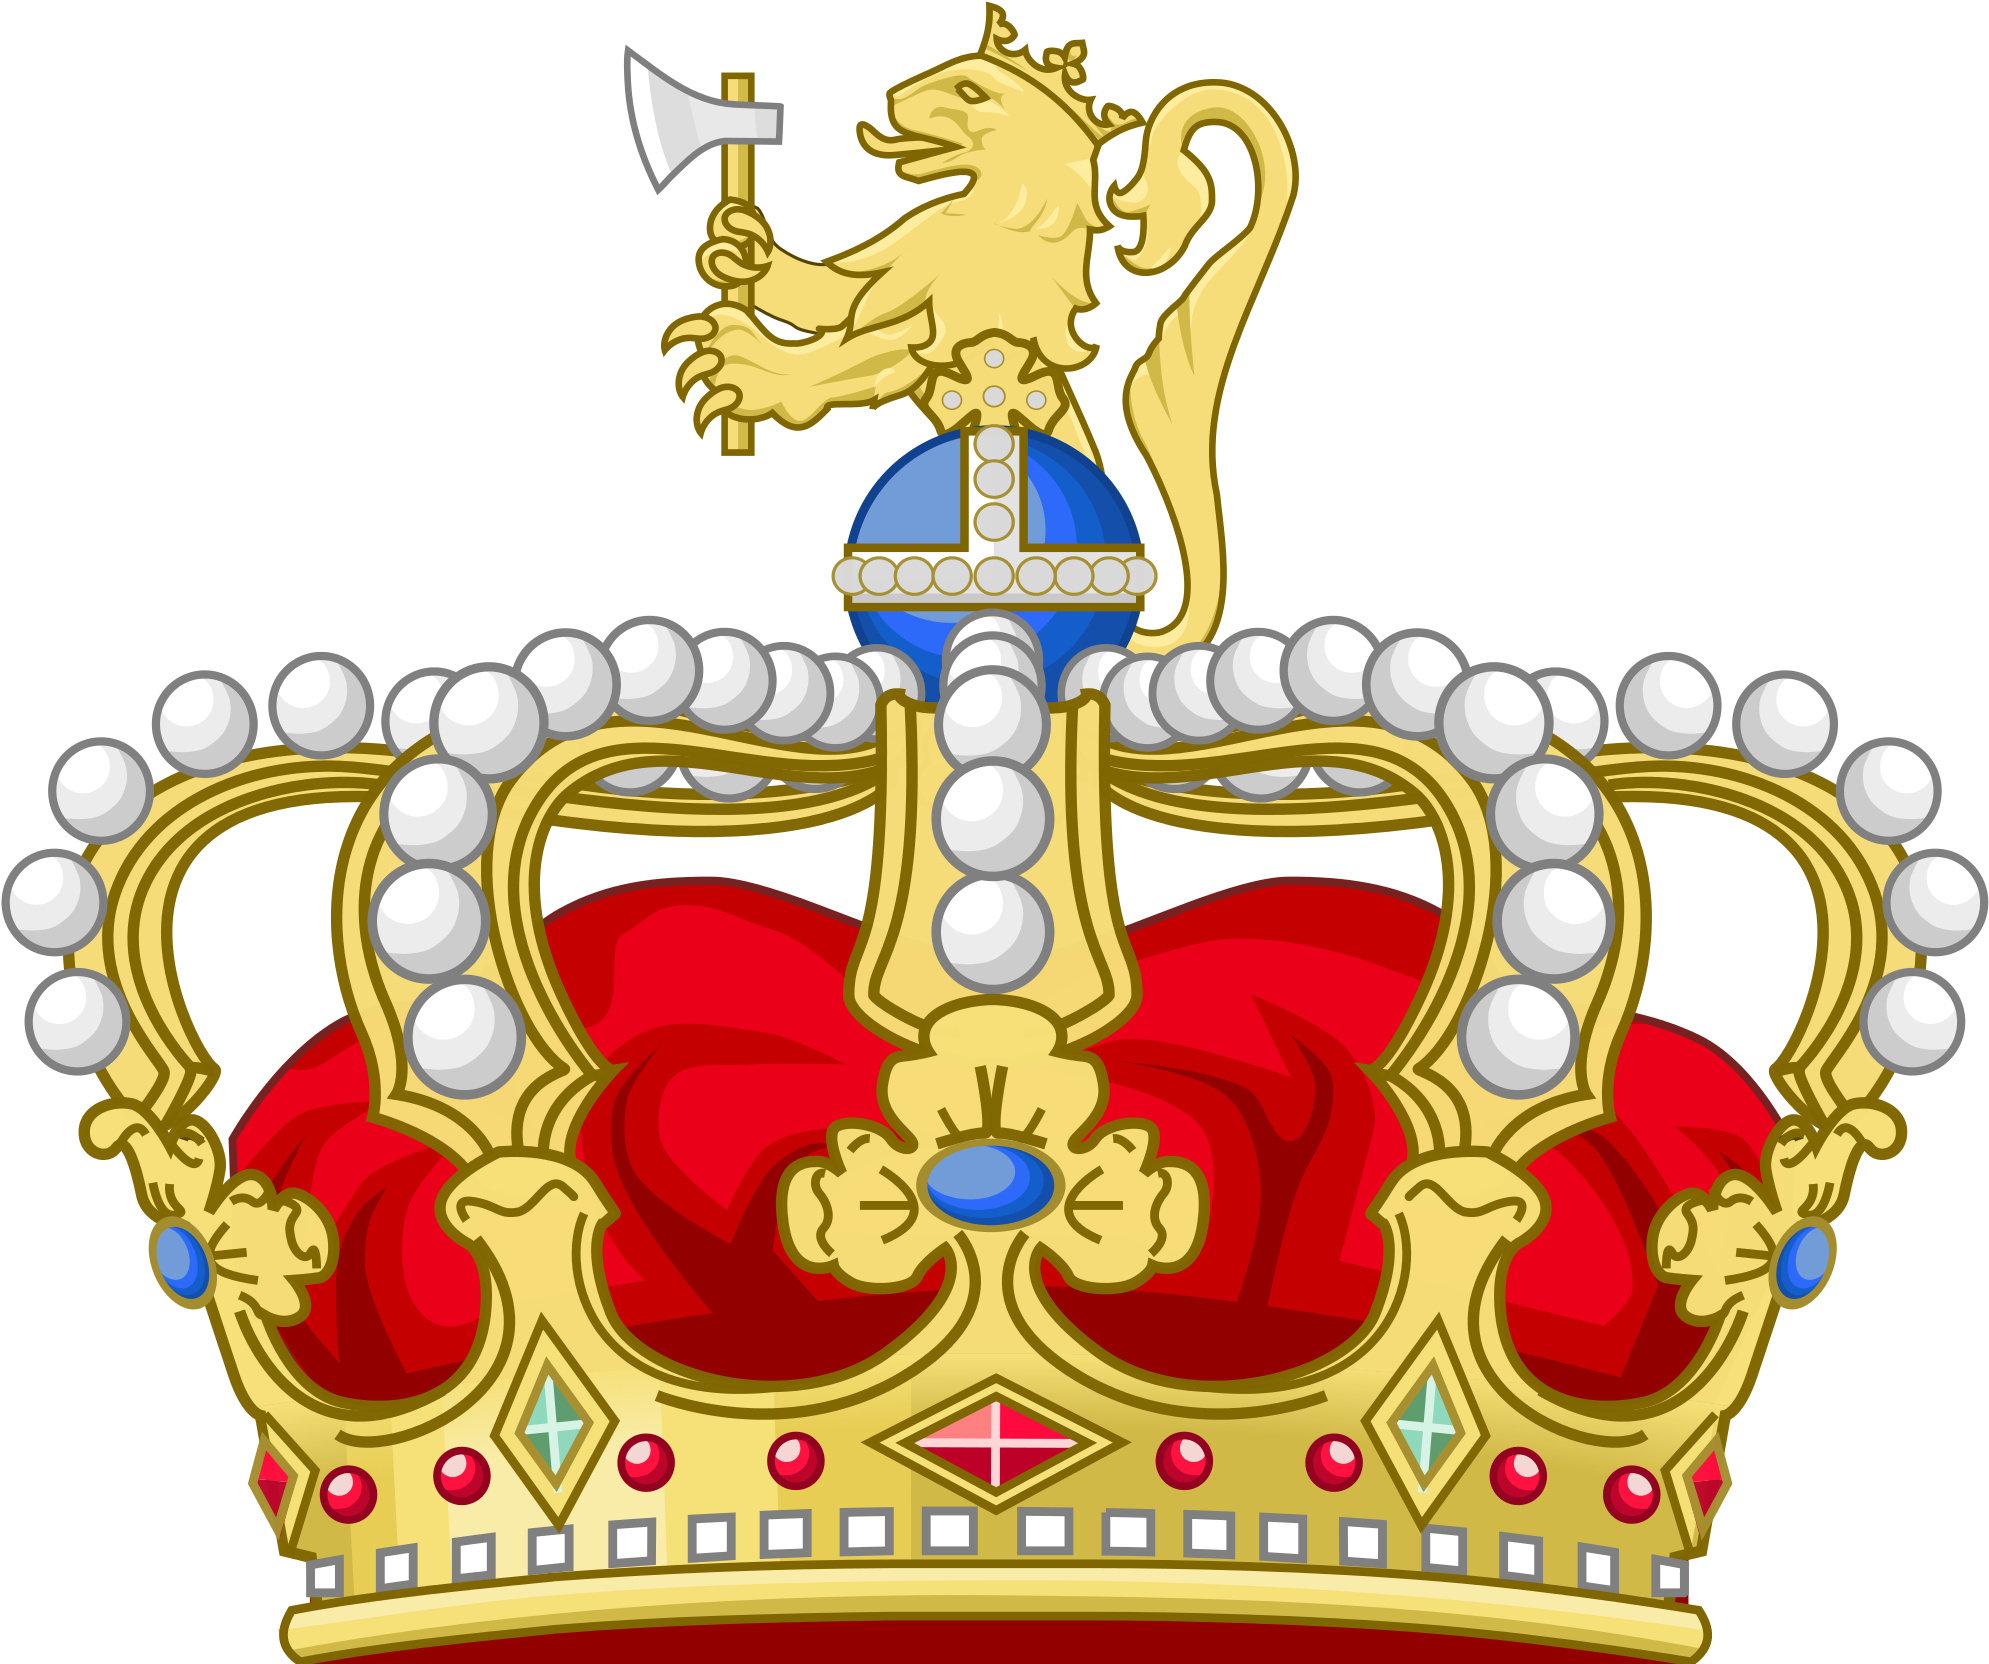 A Gold Crown With A Lion Holding An Ax And A Red Heart With Diamonds